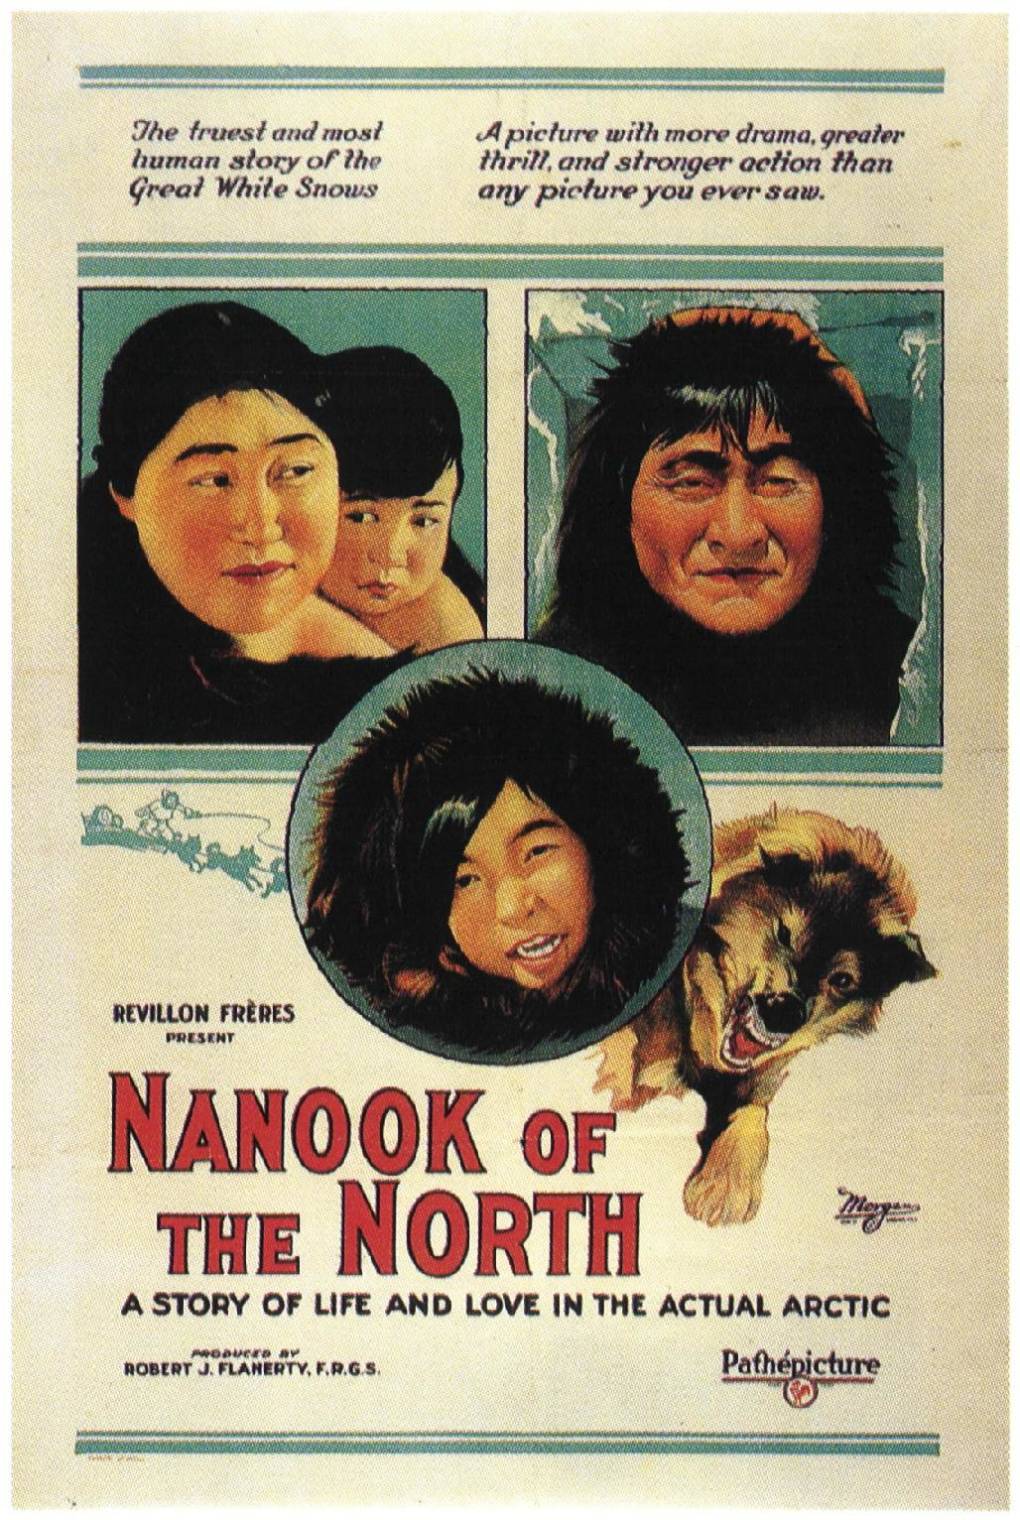 Promotional poster for 'Nanook of the North,' directed by Robert J. Flaherty, 1922.